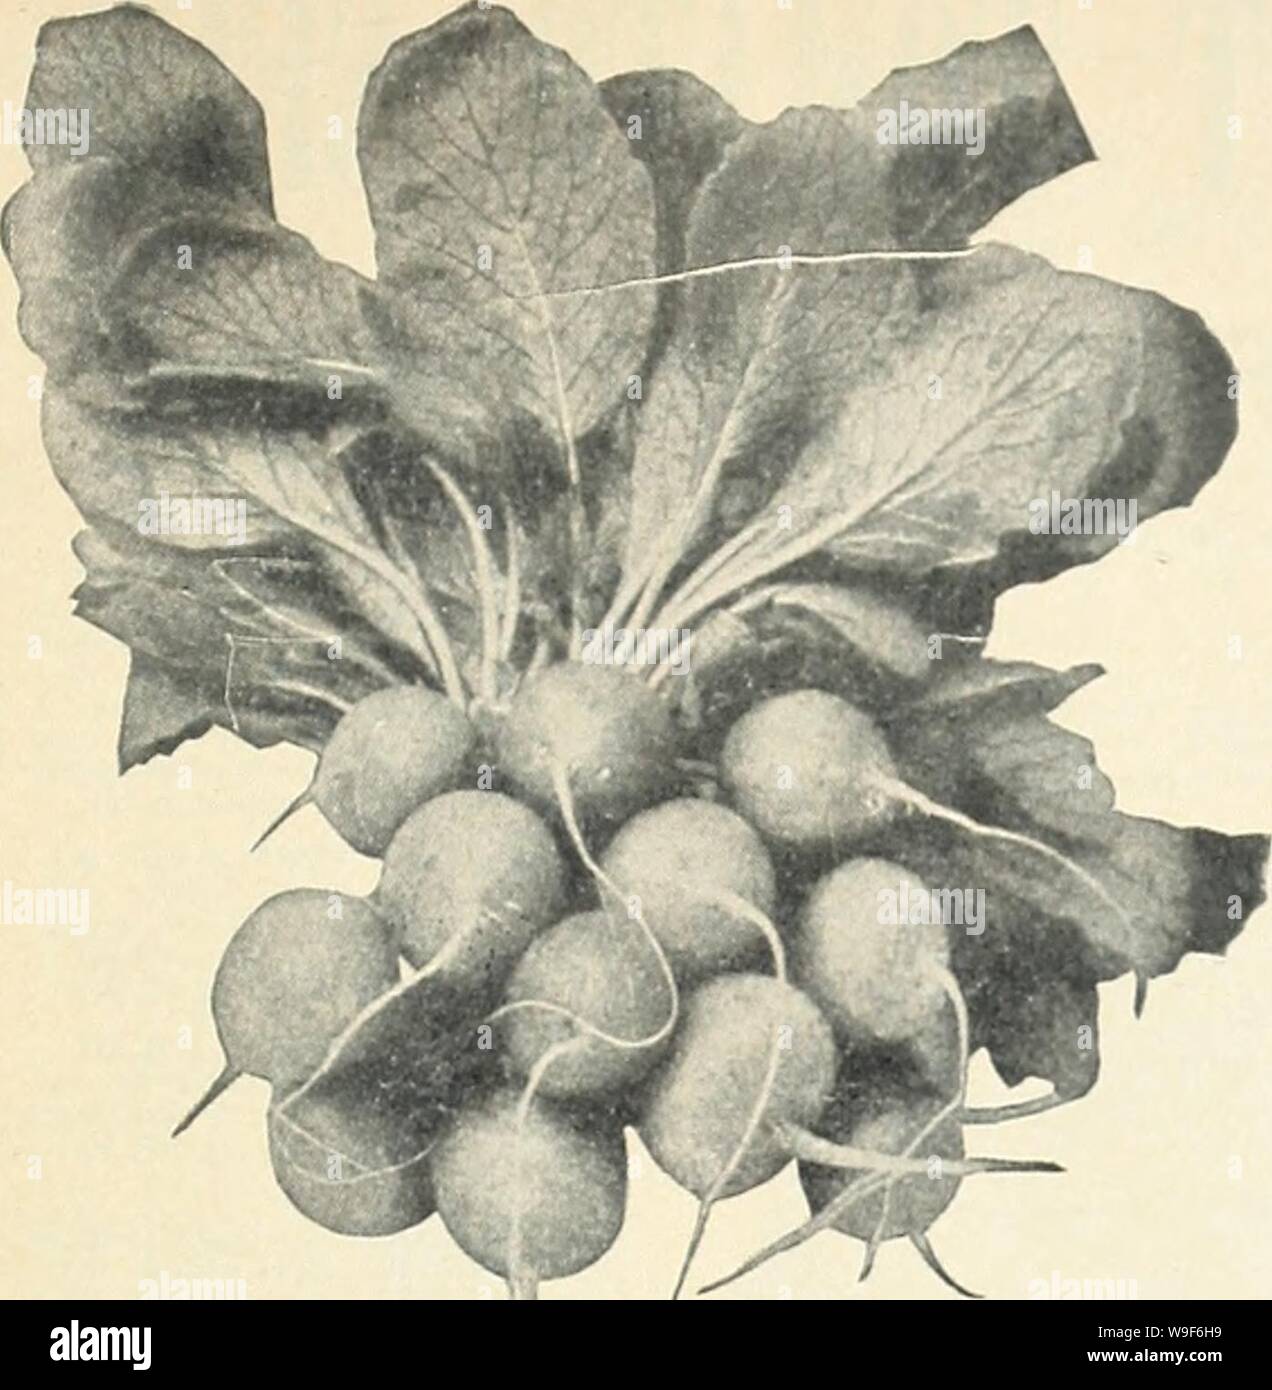 Archive image from page 18 of Currie's garden annual (1941). Currie's garden annual  curriesgardenann19curr 6 Year: 1941 ( Radish—EorLcst Scarlet Globe Forcing (Cardinal Globcl EARLIEST SCARLET GLOBE (Cardinal Globe) EXTRA SELECTED SHORT- LEAVED STOCK—The standard for either early forcing or open ground work. Our stock of it is unsurpossed. The skin is bright carmine; flesh white, firm and crisp. Ox., 15e; '4 lb., 35c; lb., 90c; 10 lbs., $8.00; Pkt., 10c. SAXA—Earliest to mature. Grow- ers hove hod them ready for use 2 weeks after planting. Round, thin, bright red skin and crisp, white flesh. Stock Photo